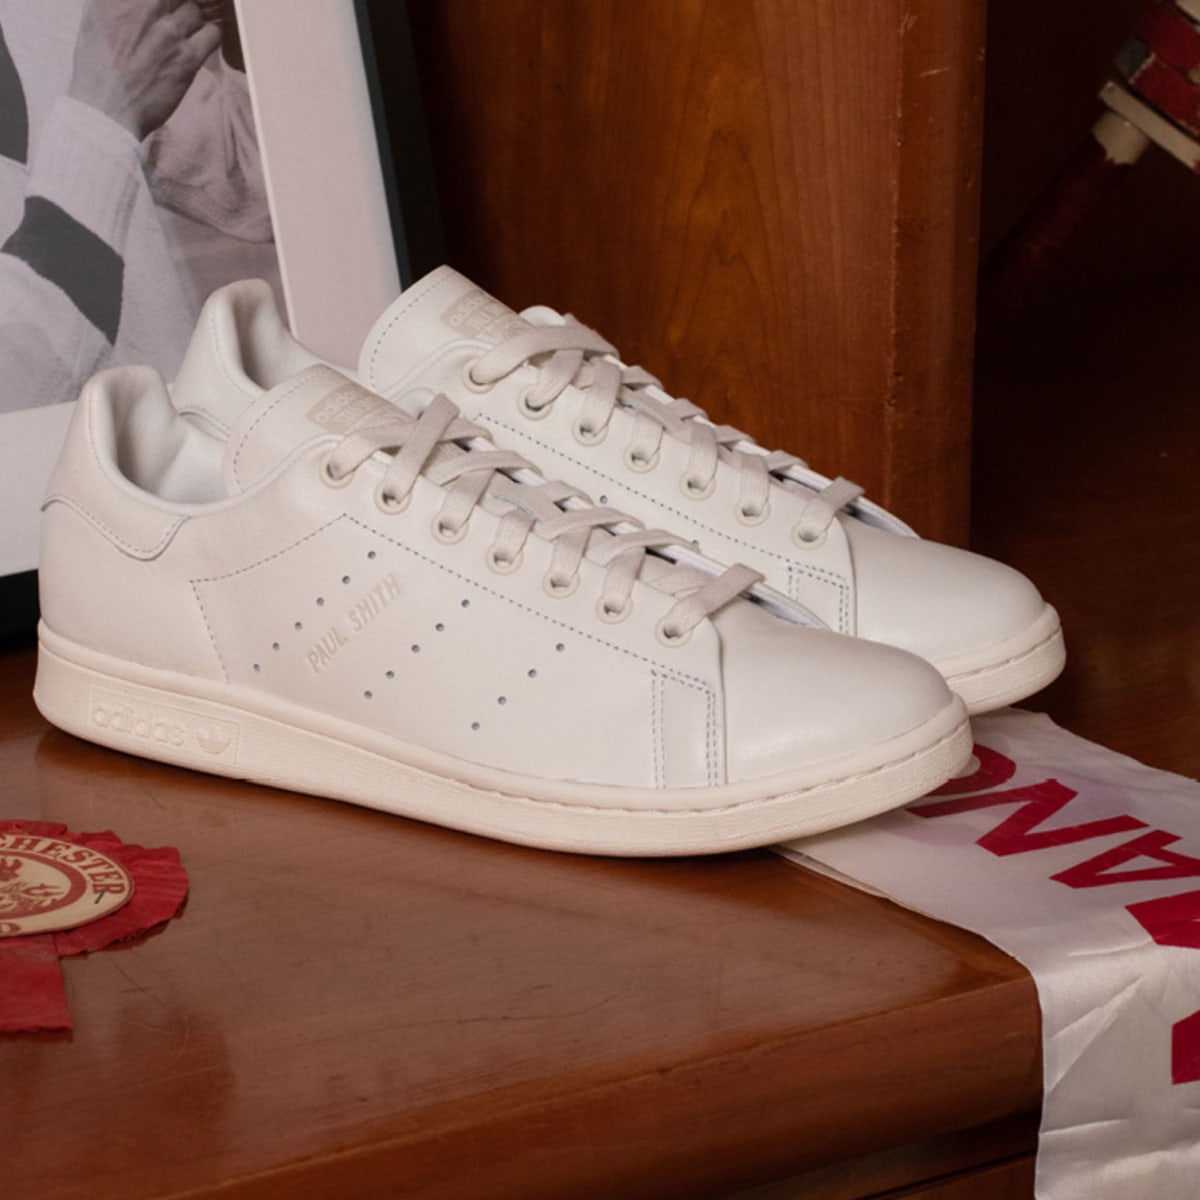 Paul Smith Stan Smith team up for a limited edition of the adidas icon Acquire